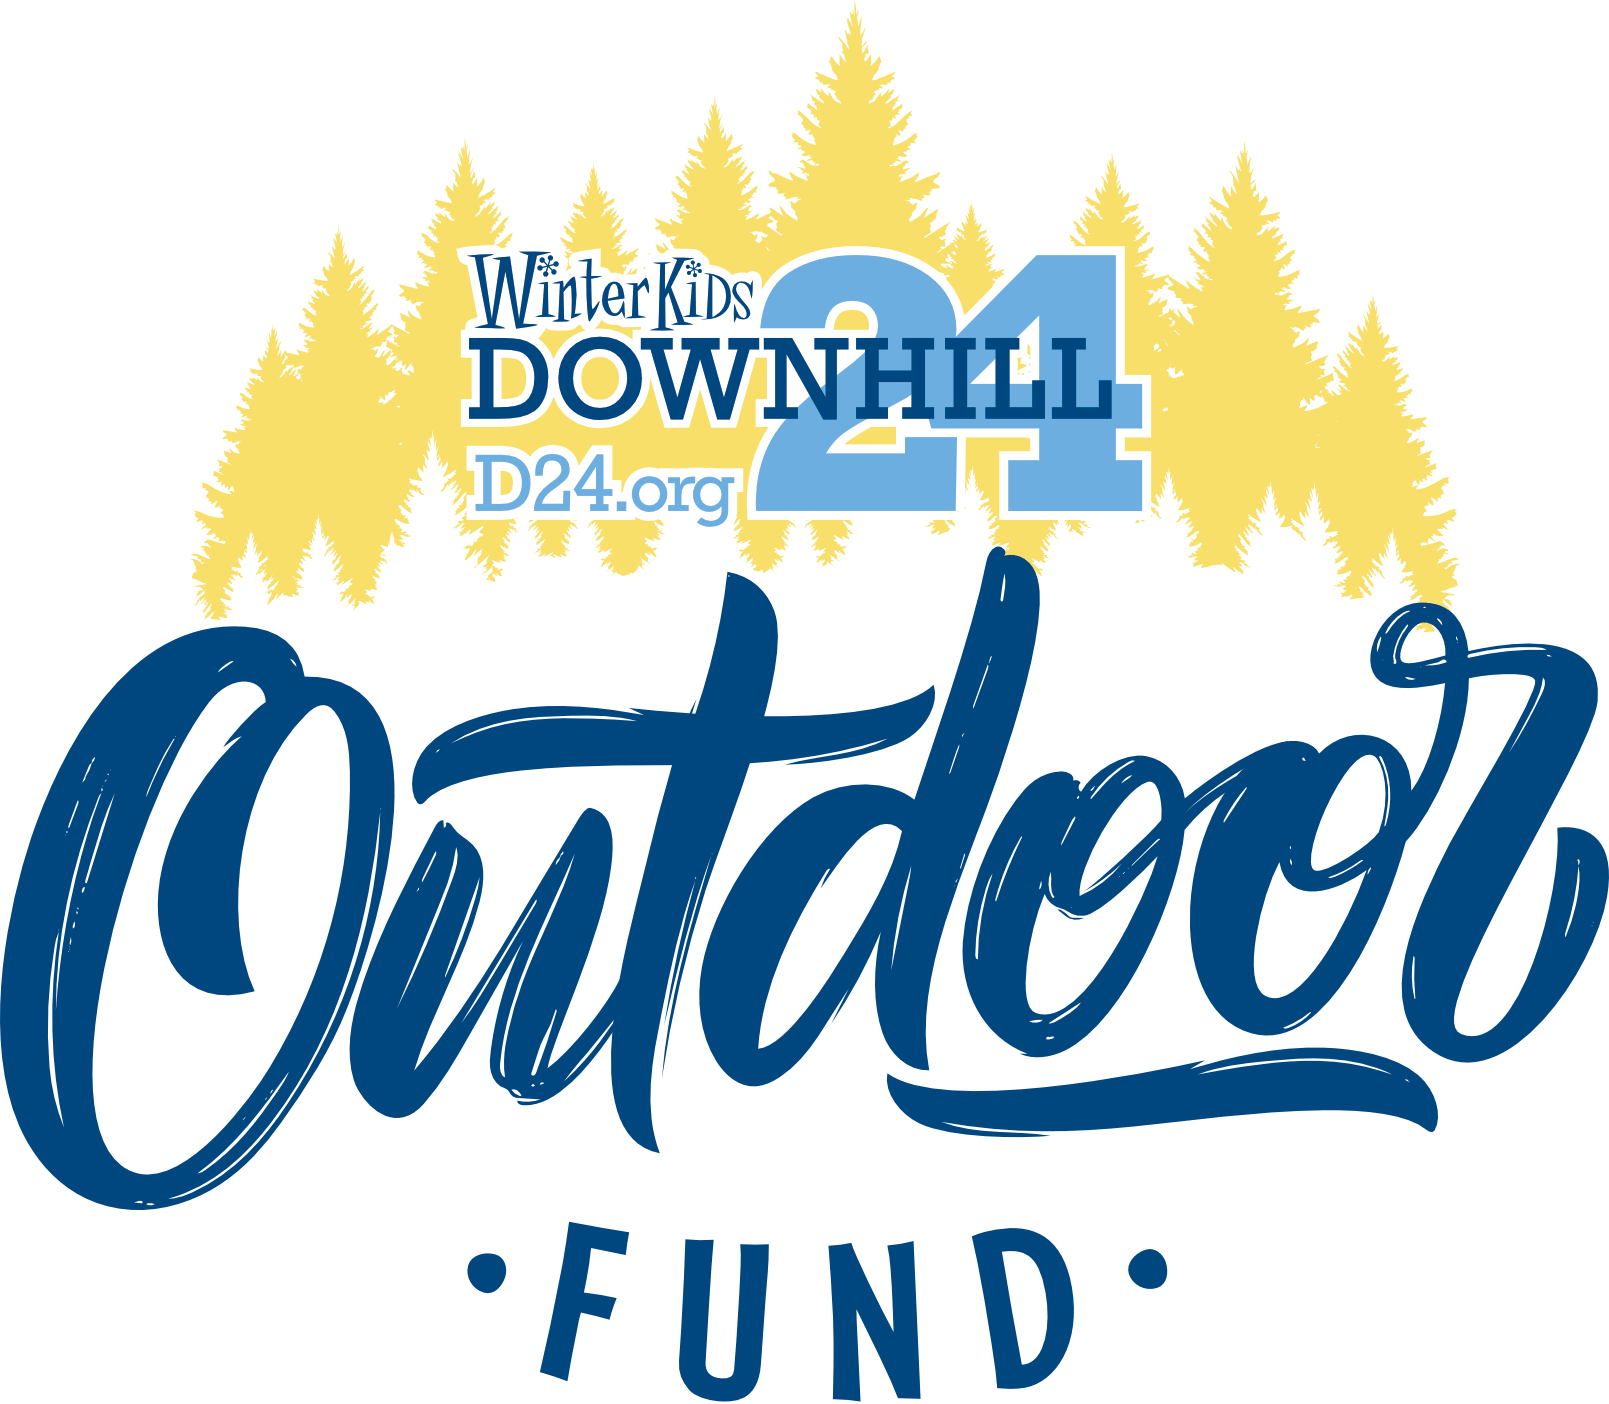 D24 outdoor fund logo yellow